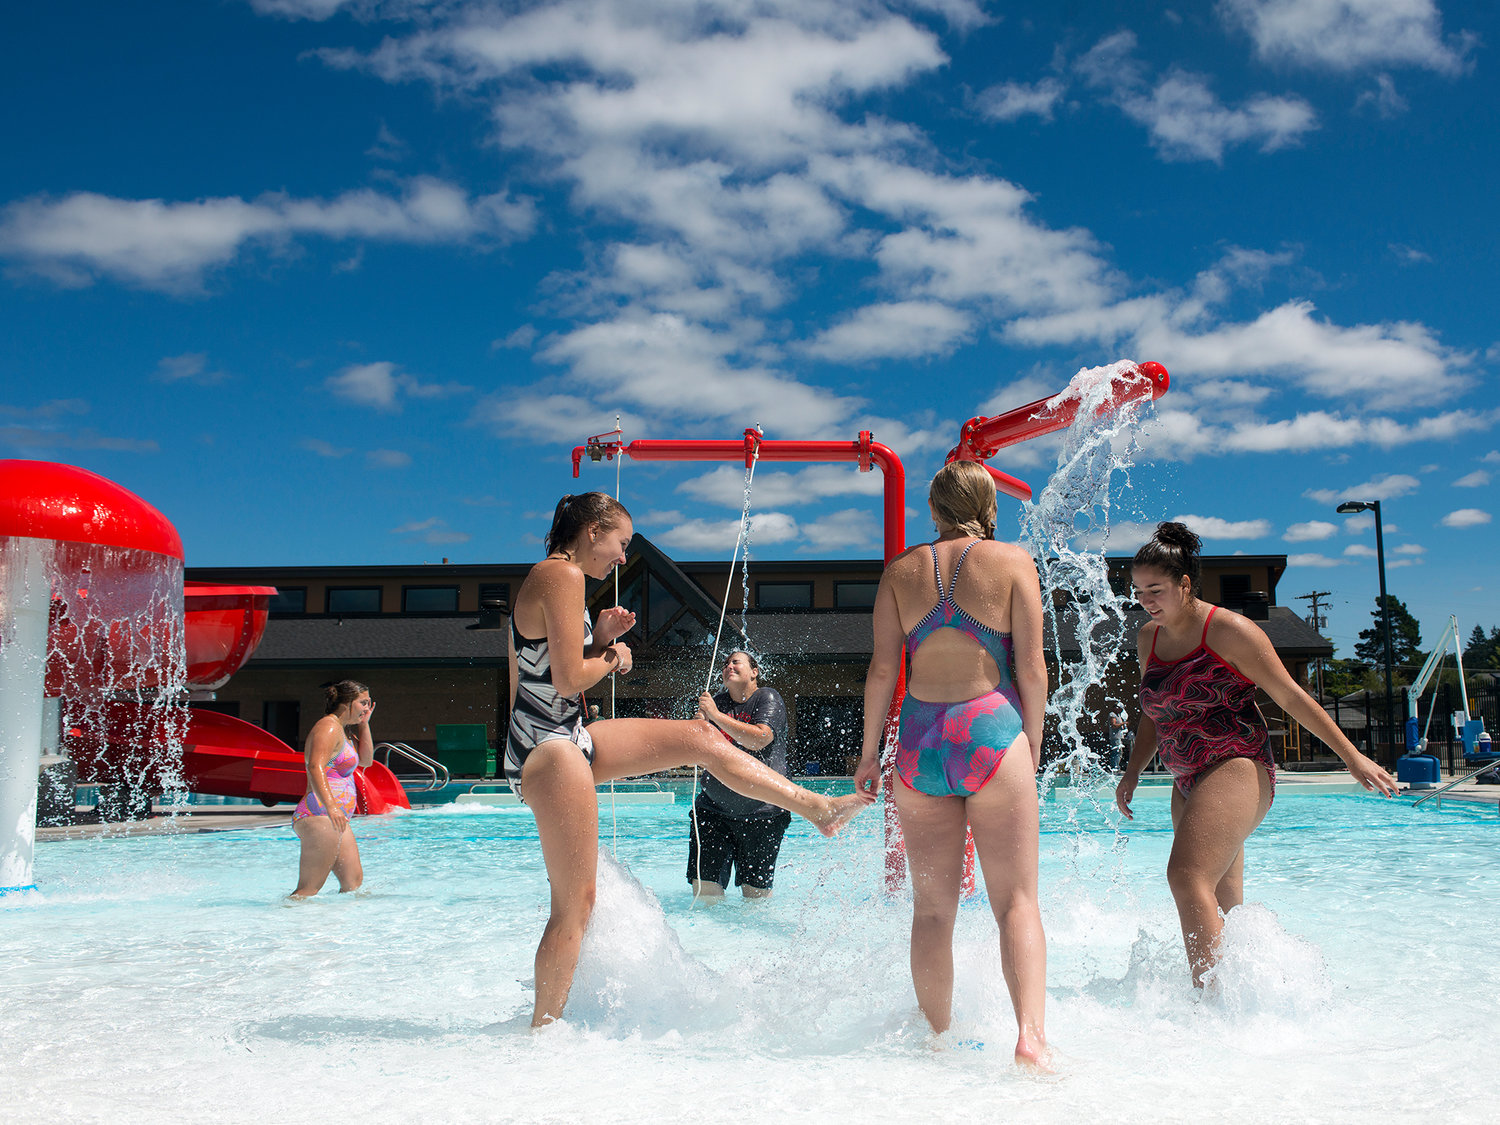 Lifeguards Hannah Cummings, left, Molly Russell, center-left, Liz Von Seggern, center, Zoe Sayler, center-right, and Raelene Heredia, right, play under one of the fountains in the zero entry area of the new Gail and Carolyn Shaw Aquatic Center in Chehalis on Tuesday afternoon.